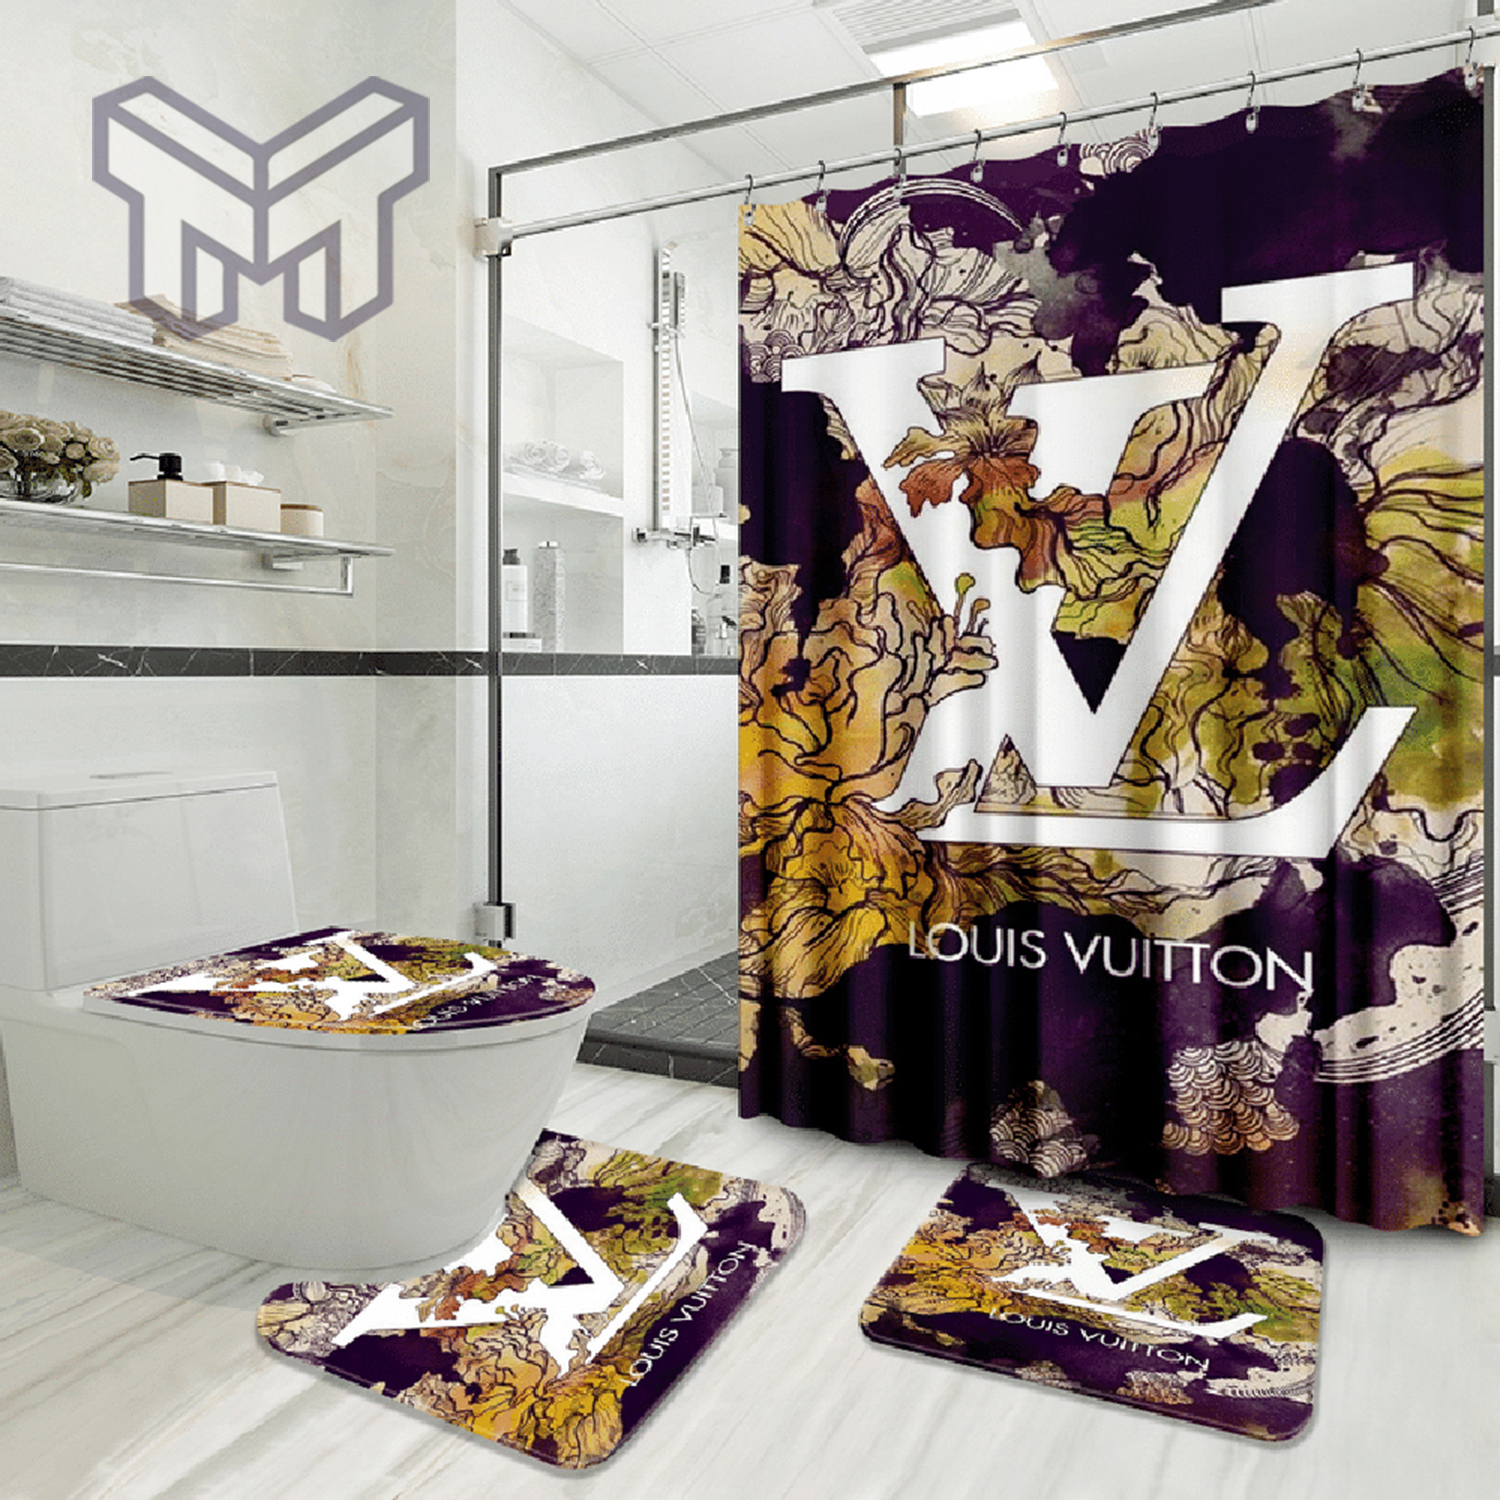 Louis Vuitton Bathroom Set Luxury Shower 2 - Shower Curtain And Rug Toilet  Seat Lid Covers Bathroom Set - Infinite Creativity. Spend Less. Smile More